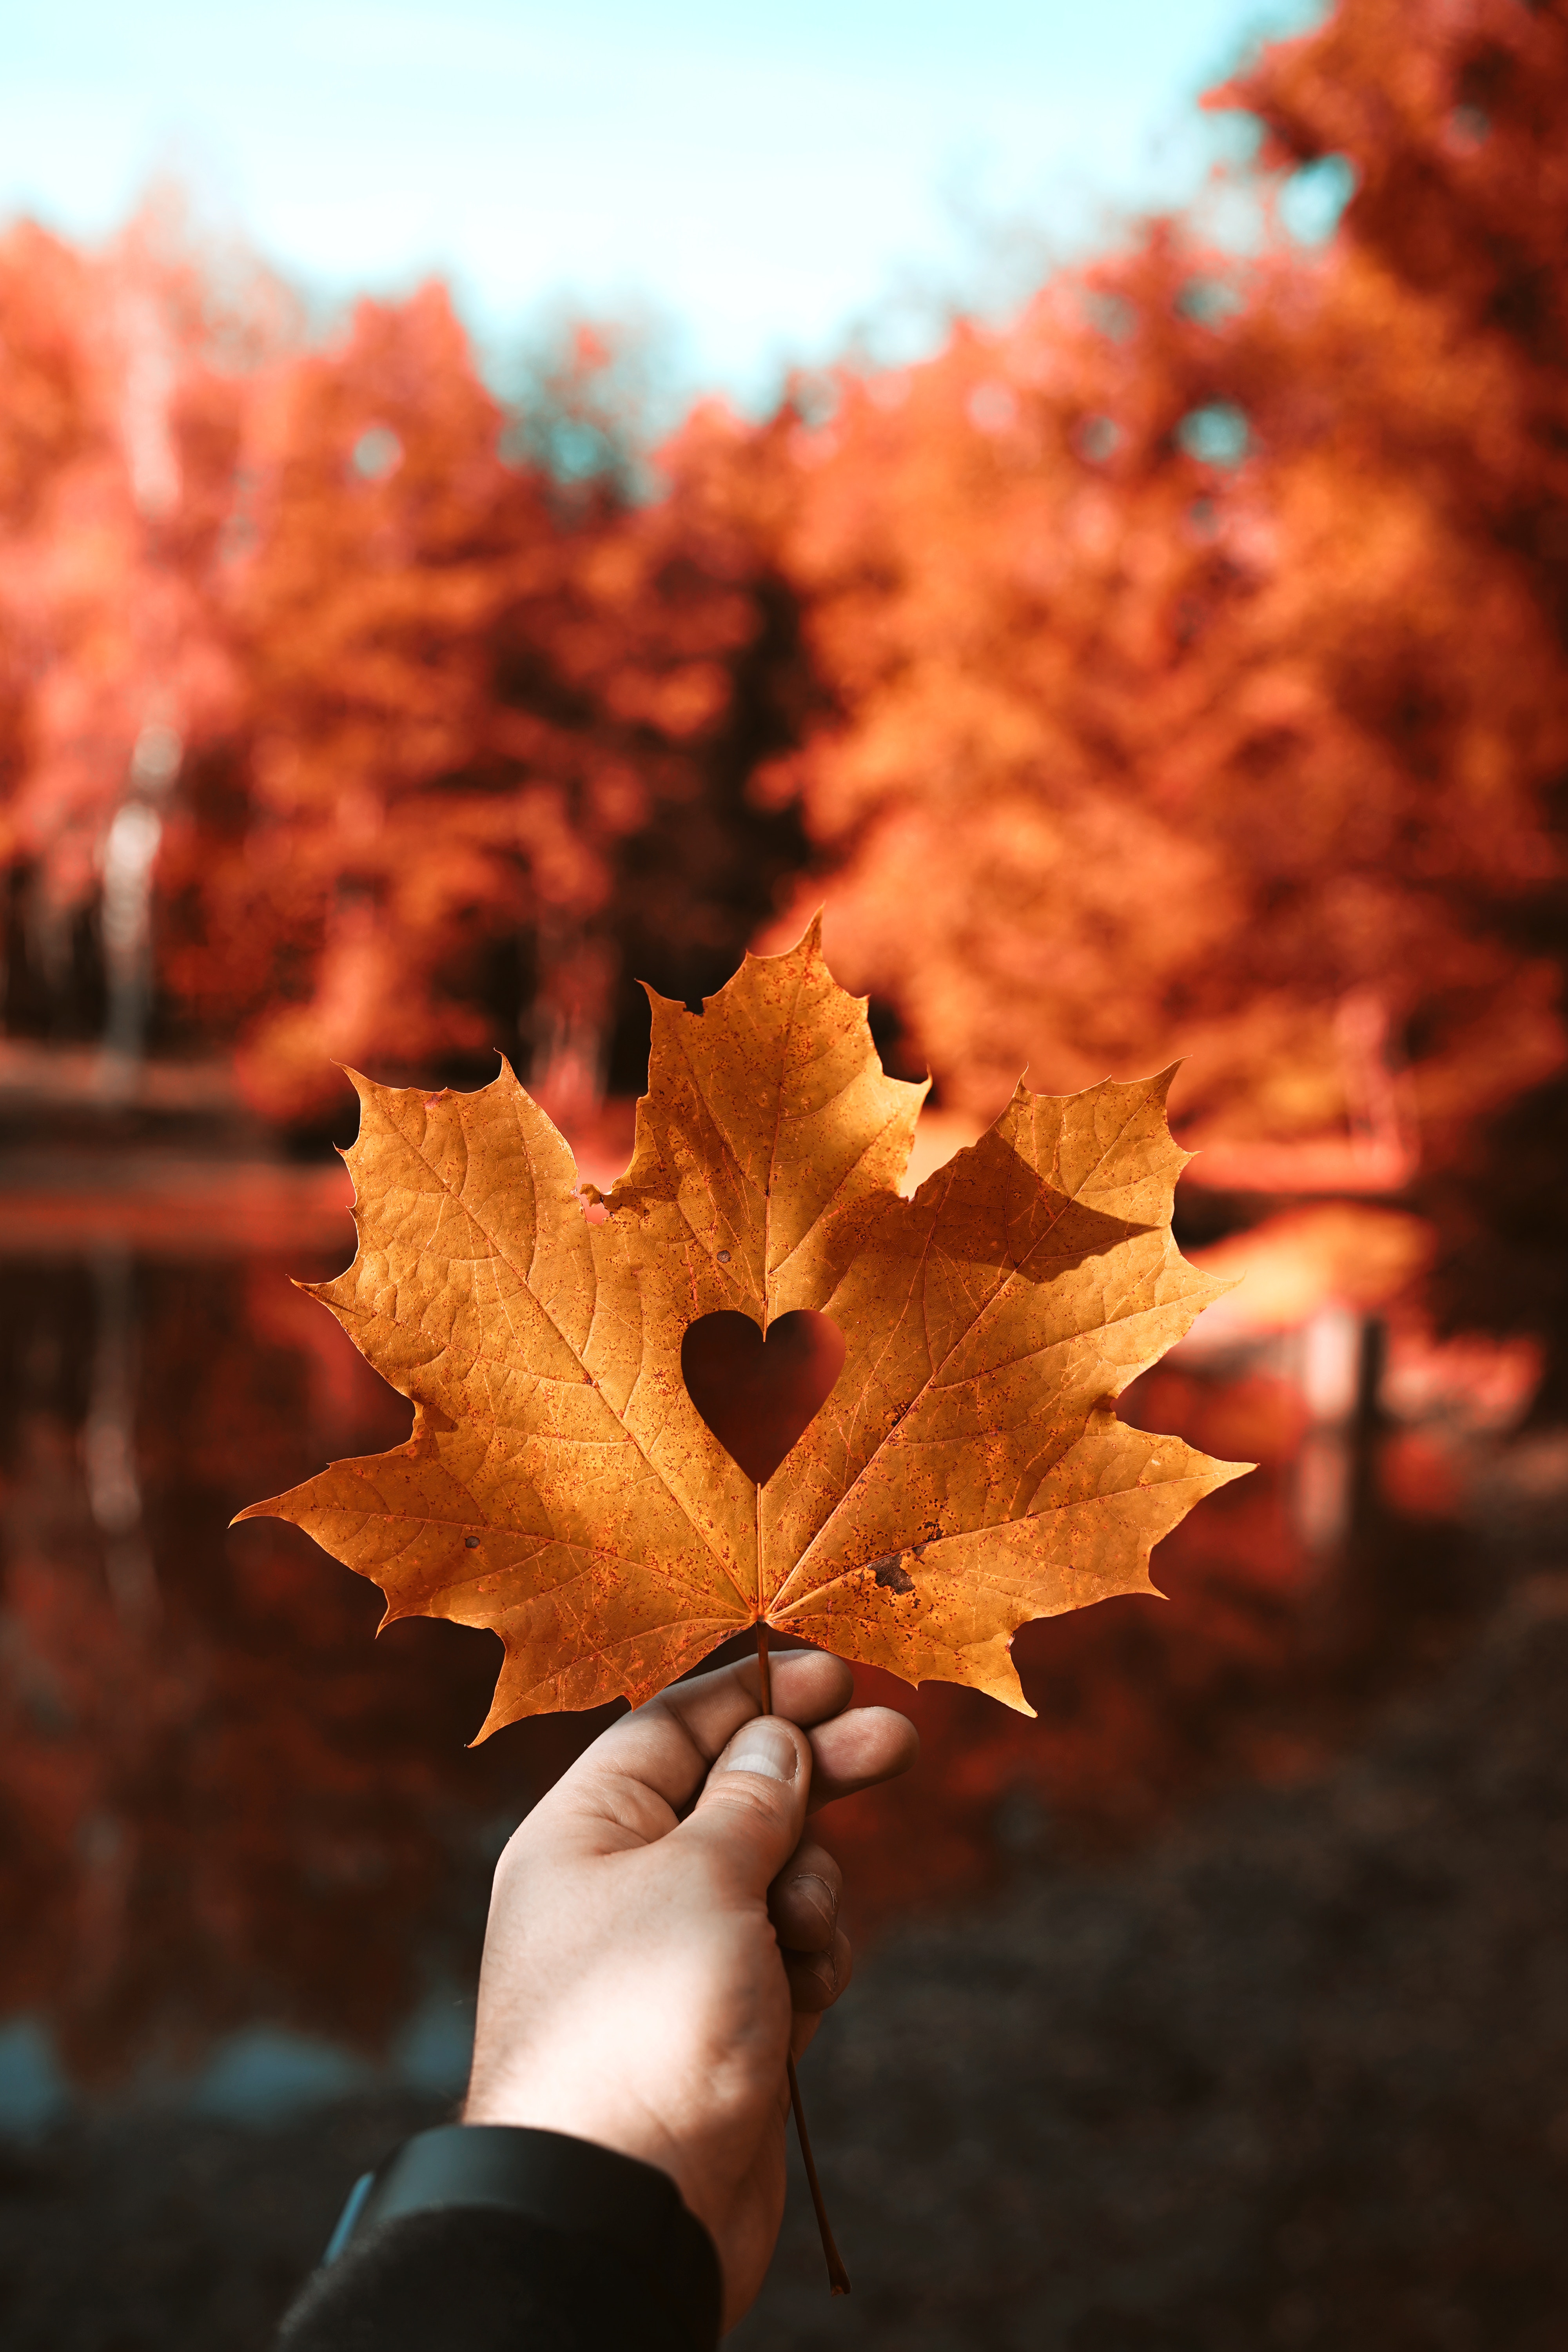 149954 Screensavers and Wallpapers Leaf for phone. Download heart, autumn, love, hand, blur, smooth, sheet, leaf, maple pictures for free